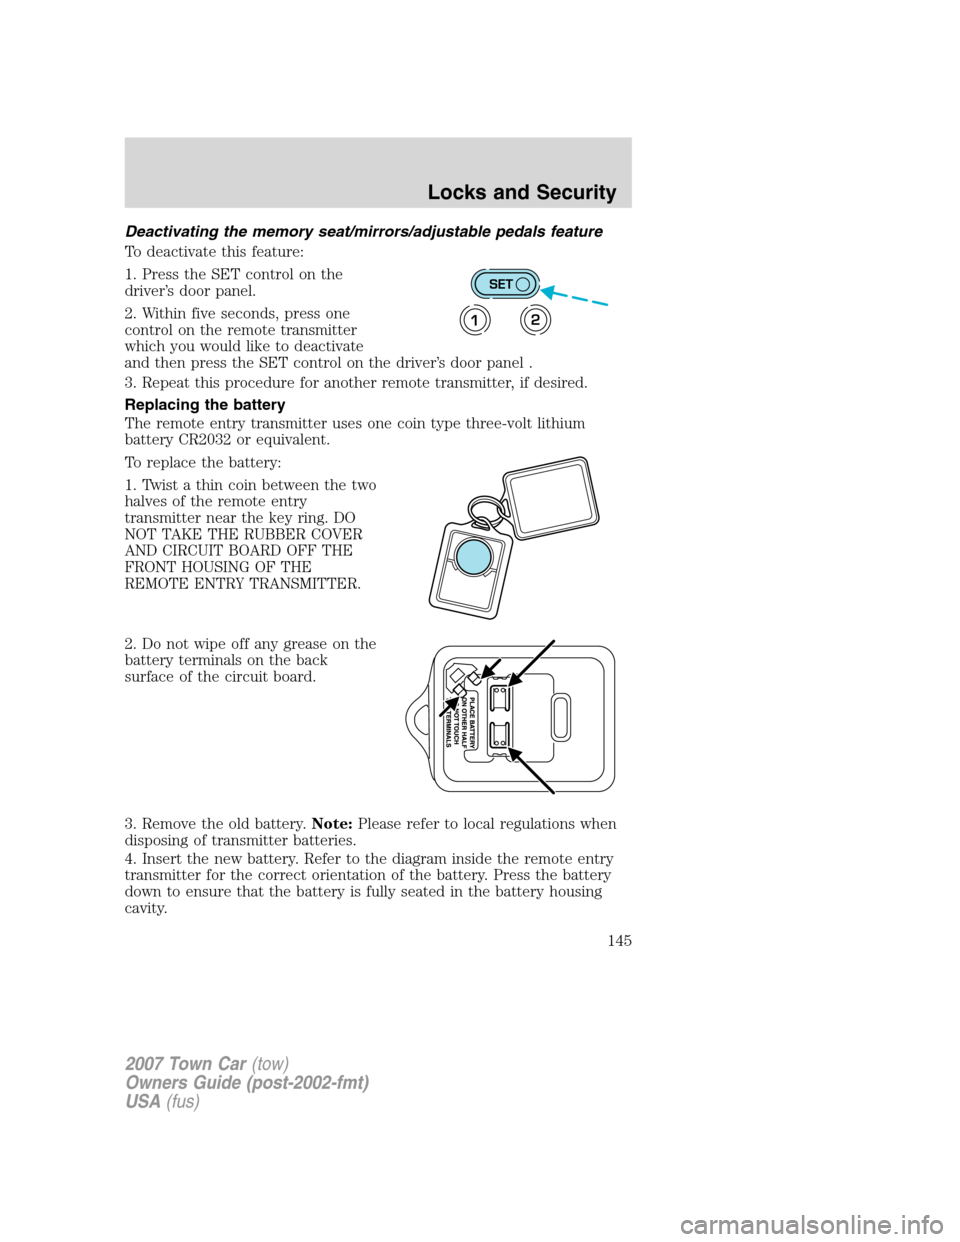 LINCOLN TOWN CAR 2007  Owners Manual Deactivating the memory seat/mirrors/adjustable pedals feature
To deactivate this feature:
1. Press the SET control on the
driver’s door panel.
2. Within five seconds, press one
control on the remot